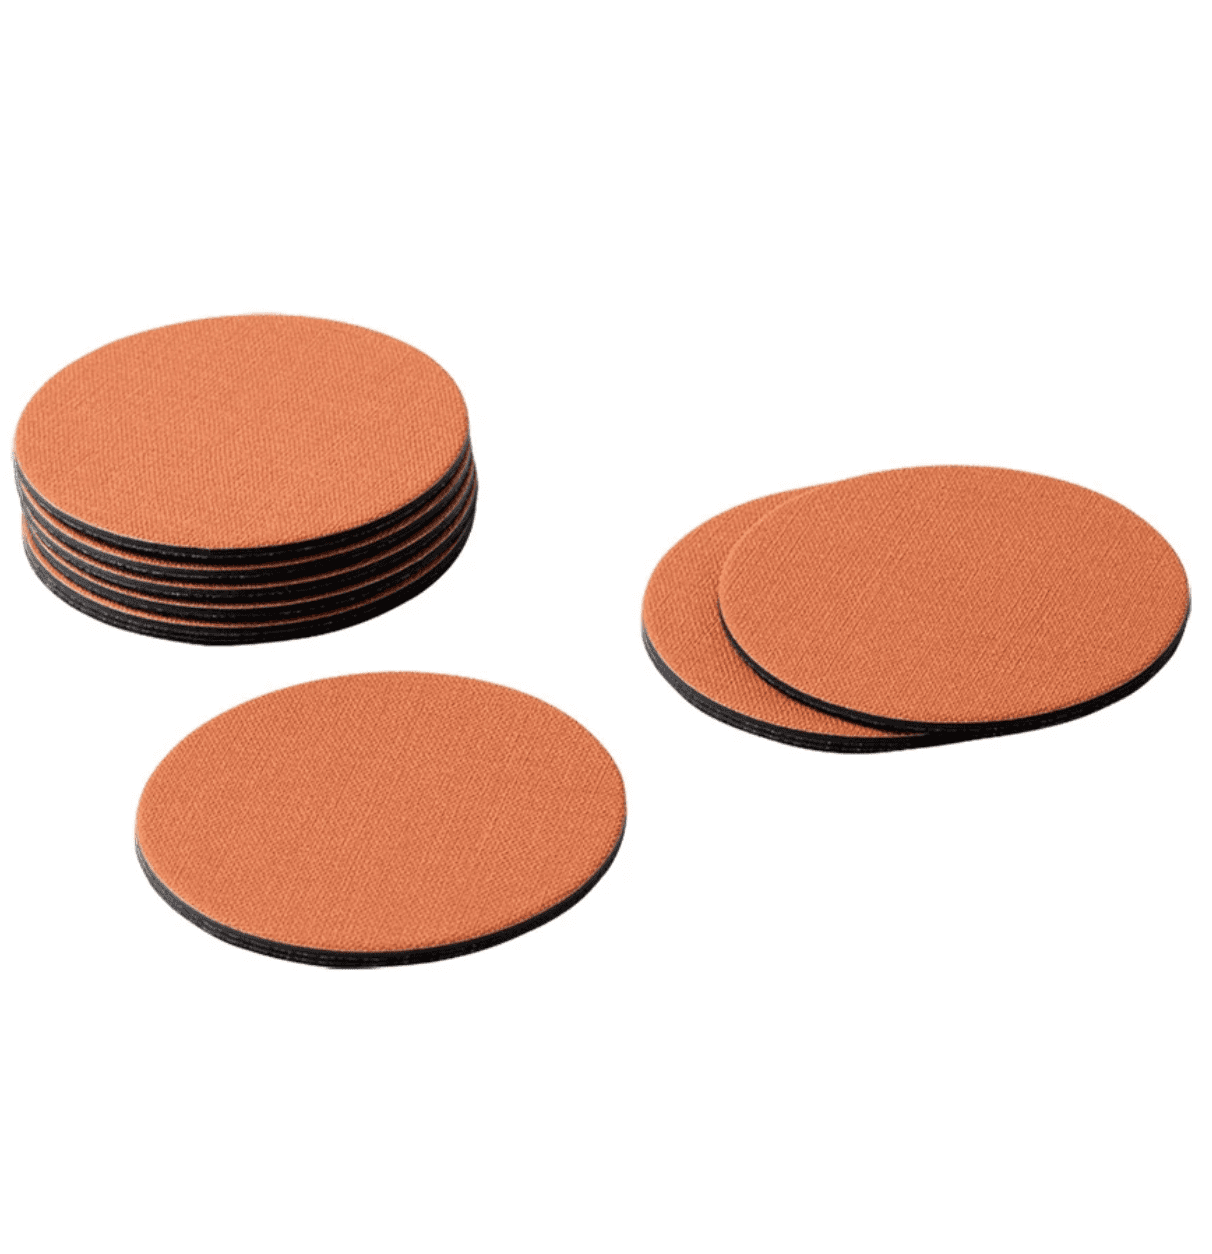 Lipper International Acacia Round with Cork Coasters and Caddy 7-Piece Set 